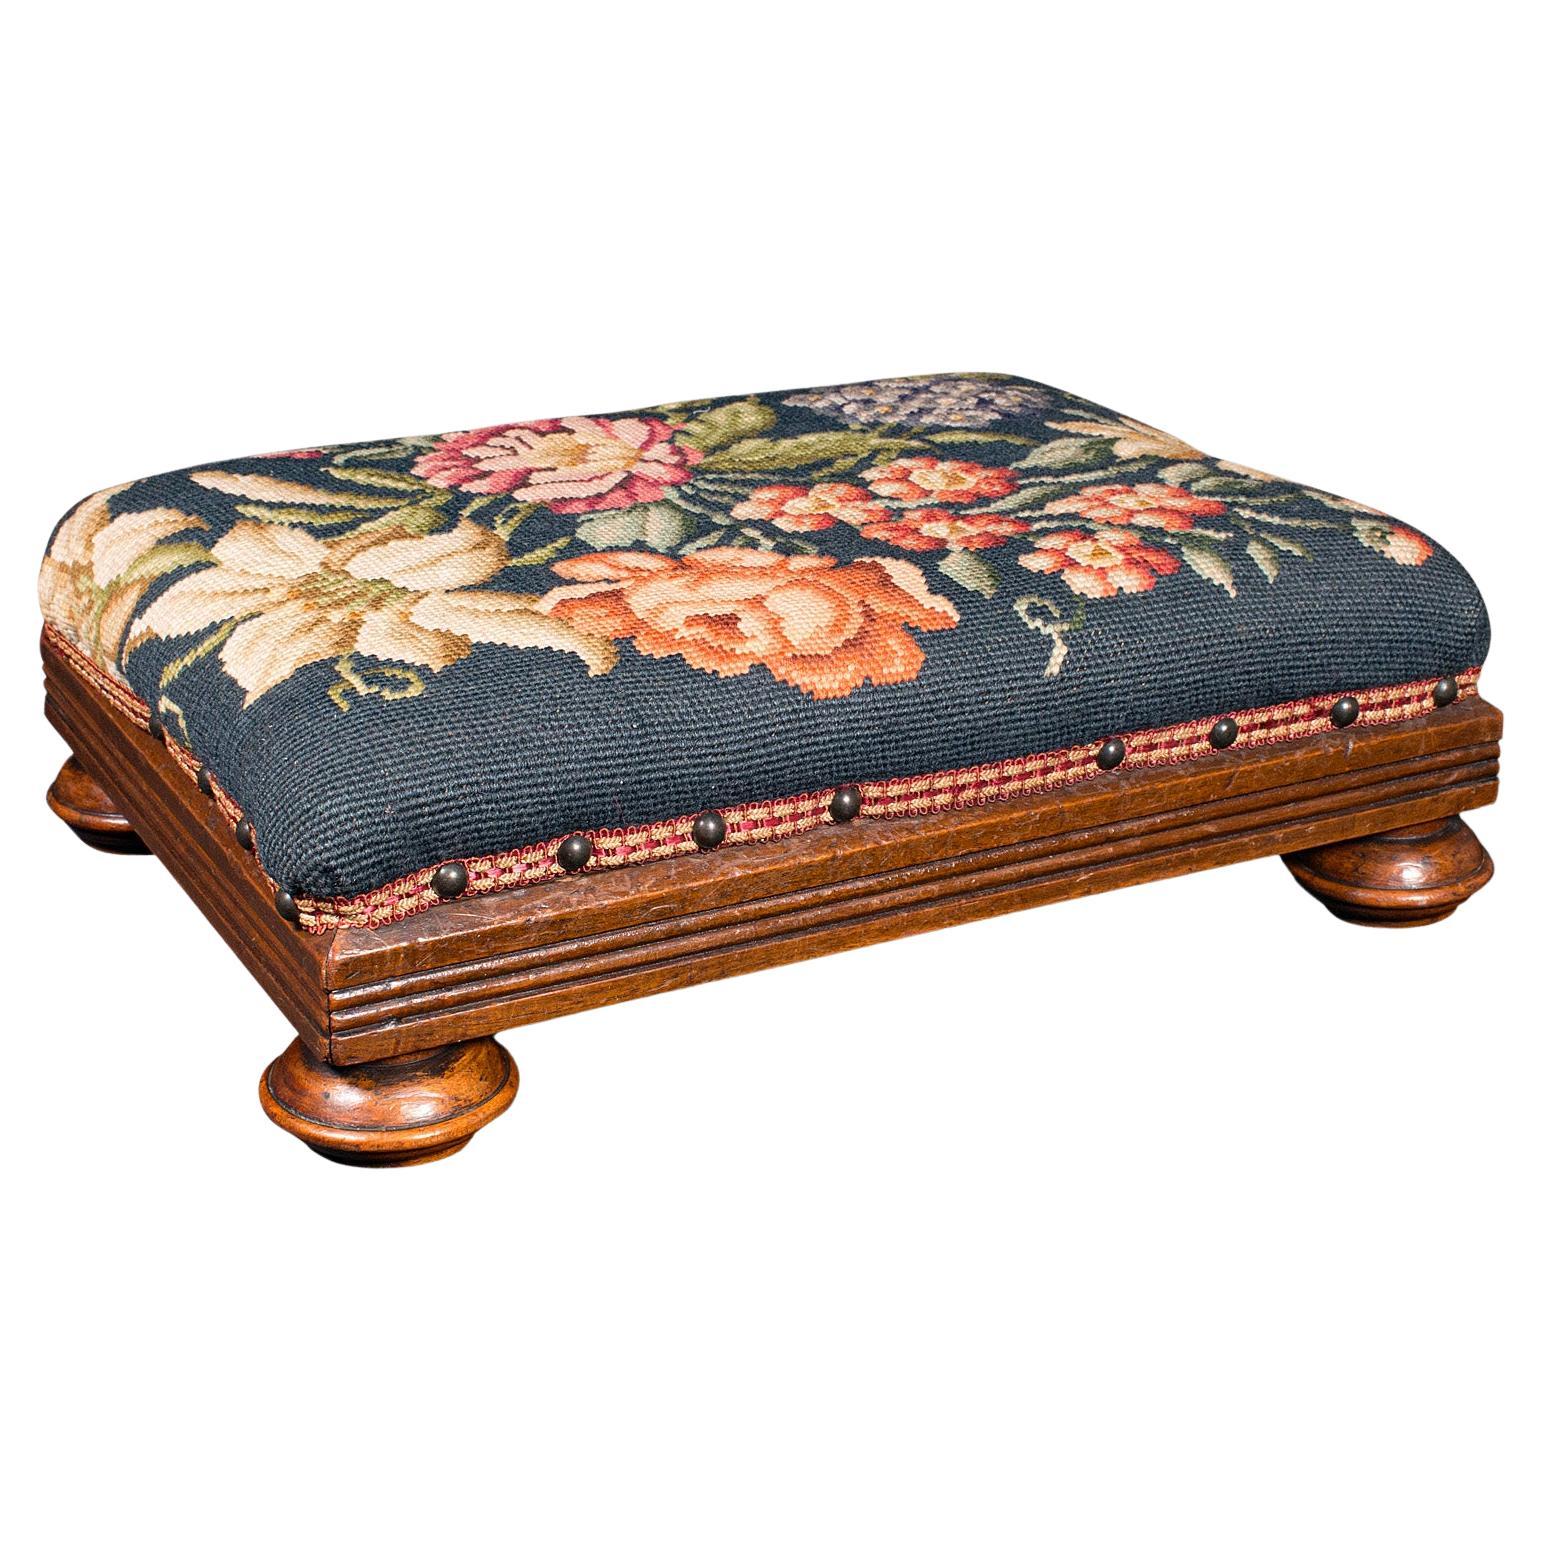 Antique Footstool, English, Needlepoint, Fireside Footrest, Stool, Victorian For Sale